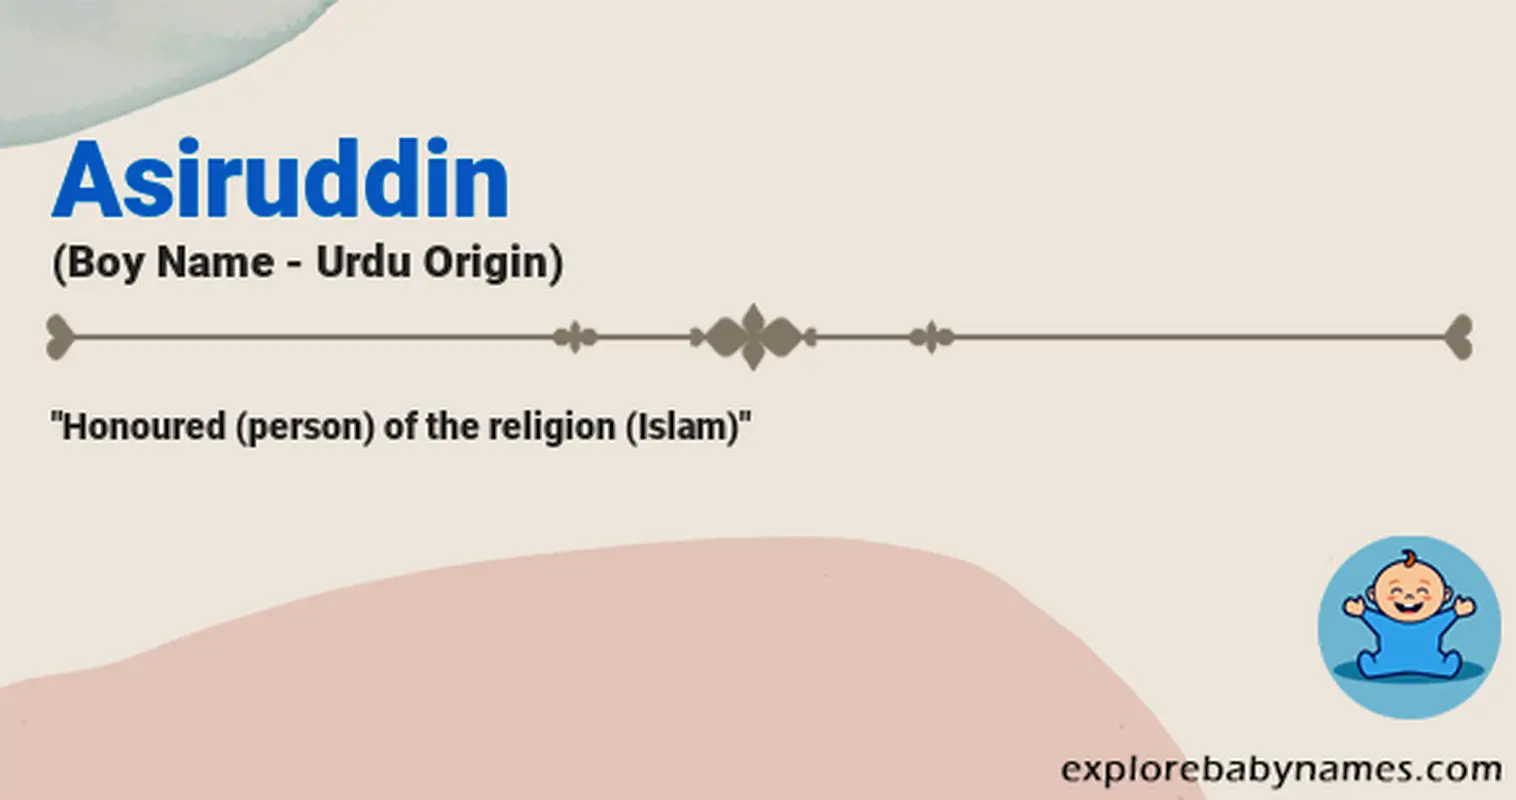 Meaning of Asiruddin